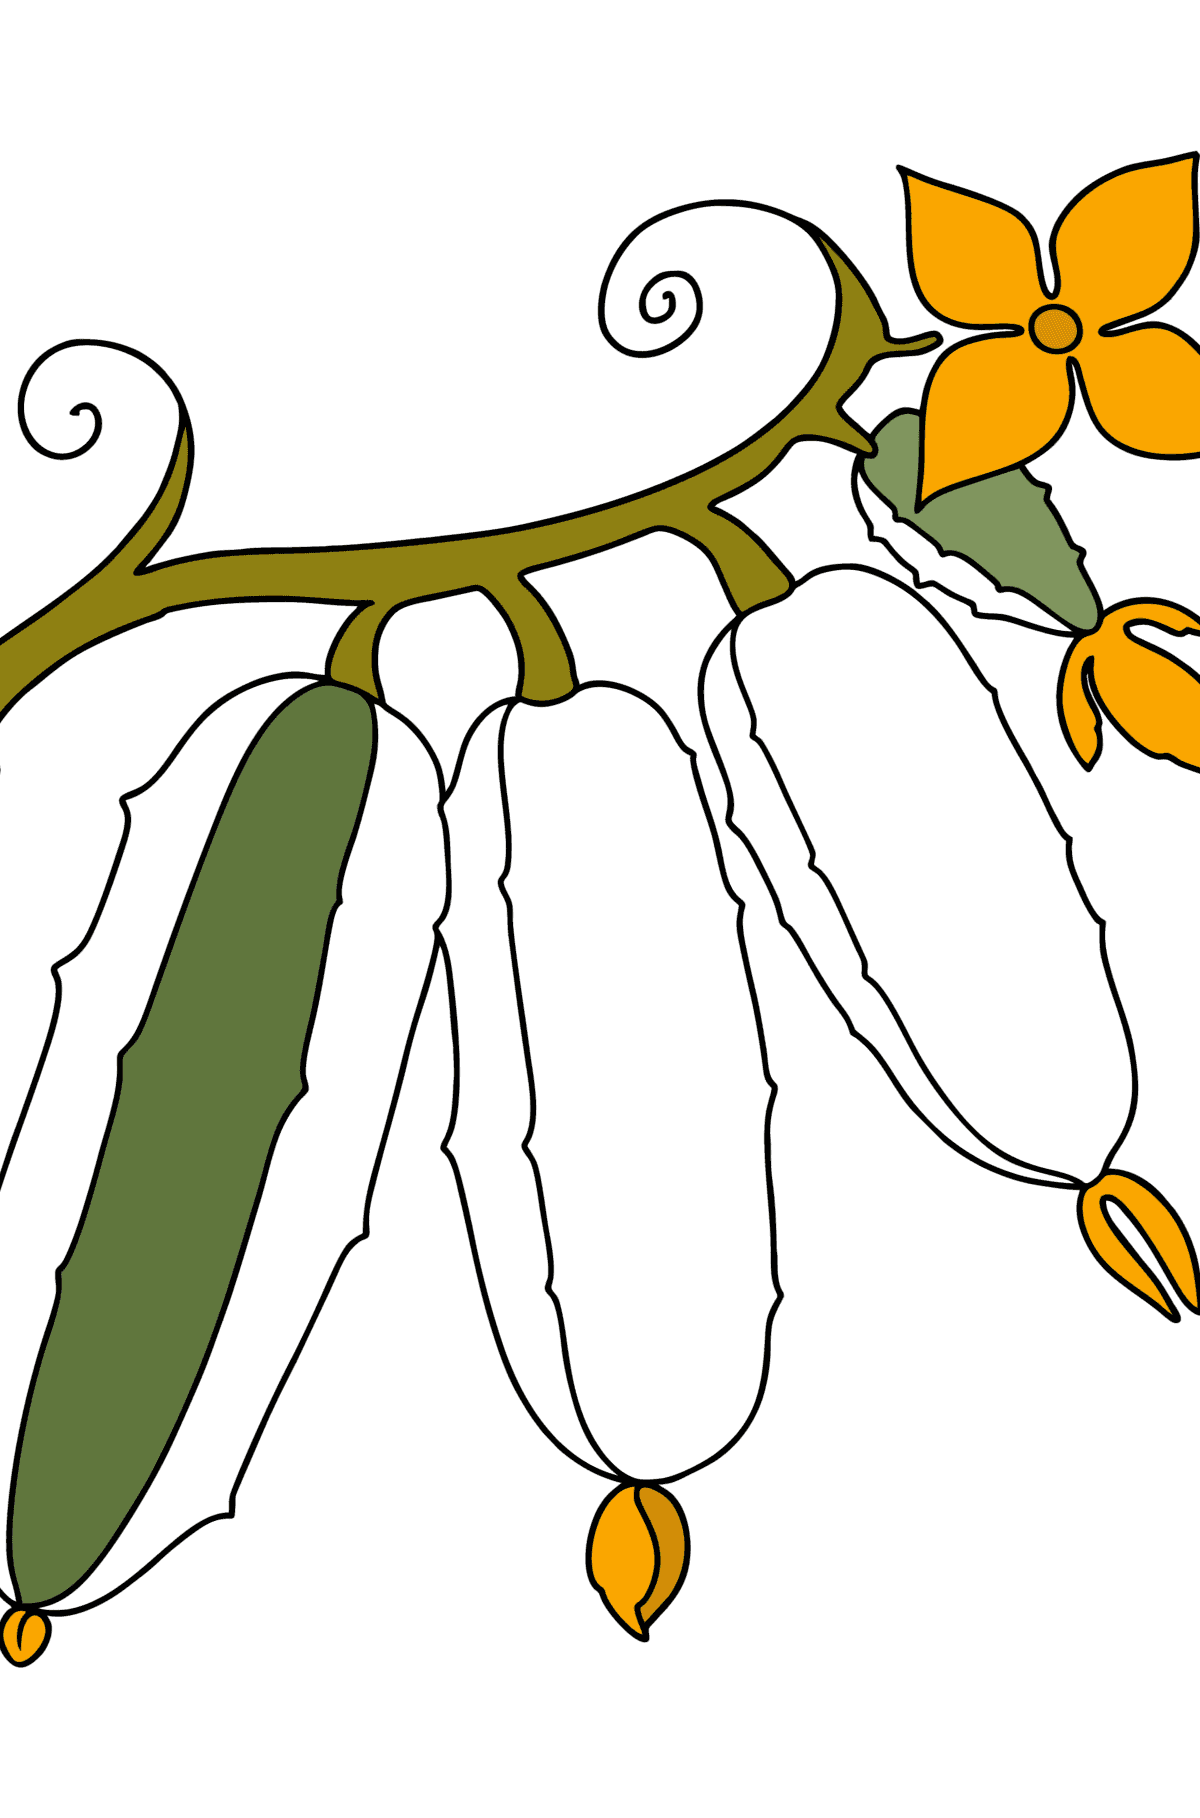 Cucumbers сoloring page - Coloring Pages for Kids